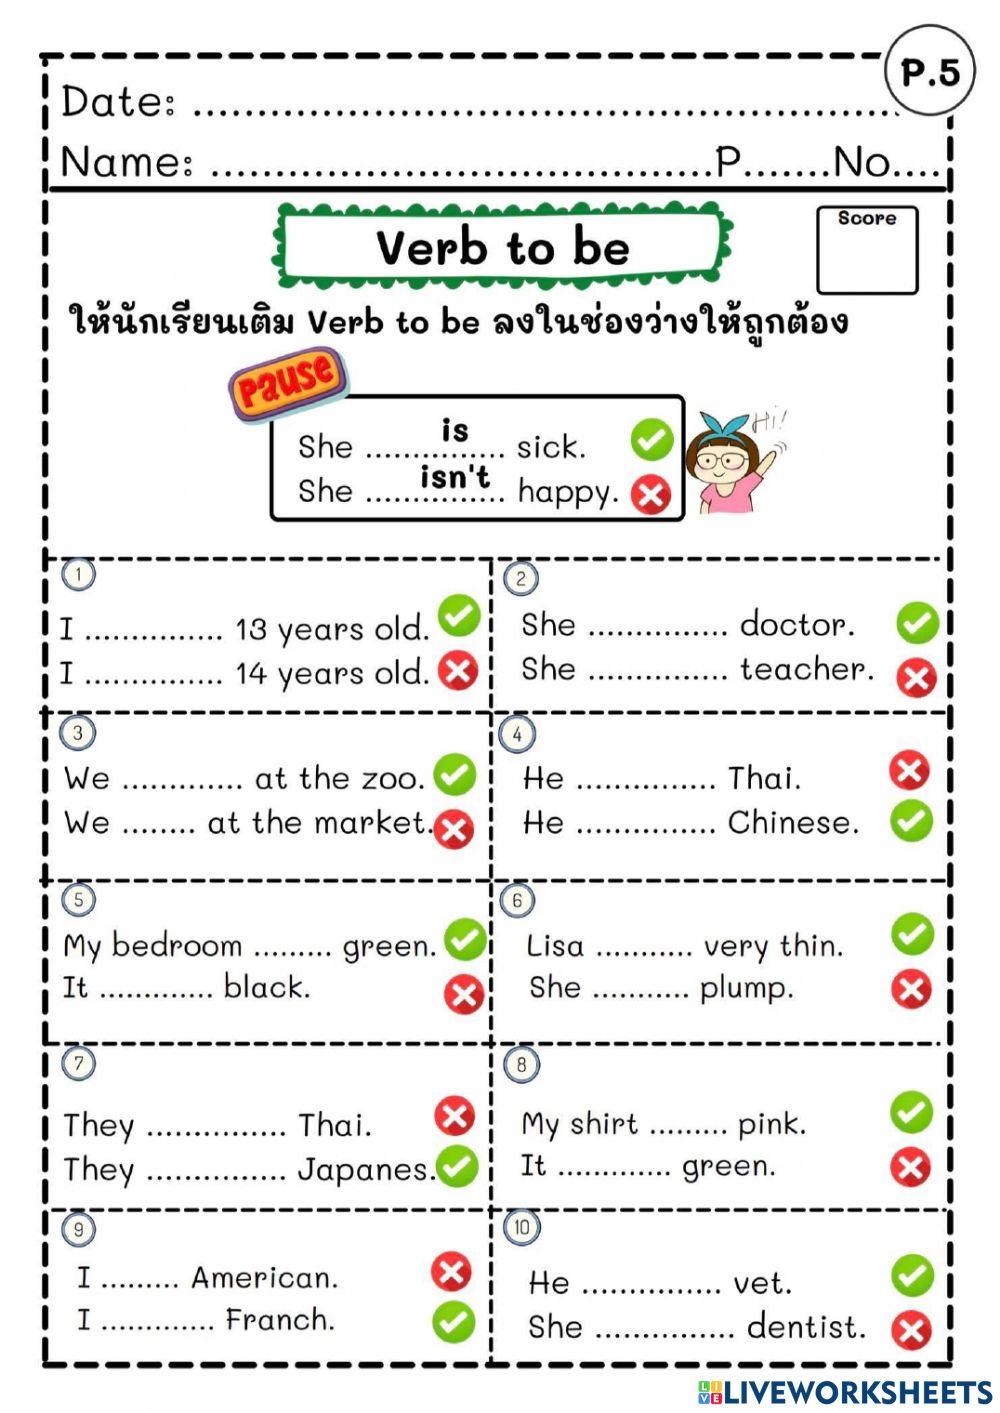 Verb to be3